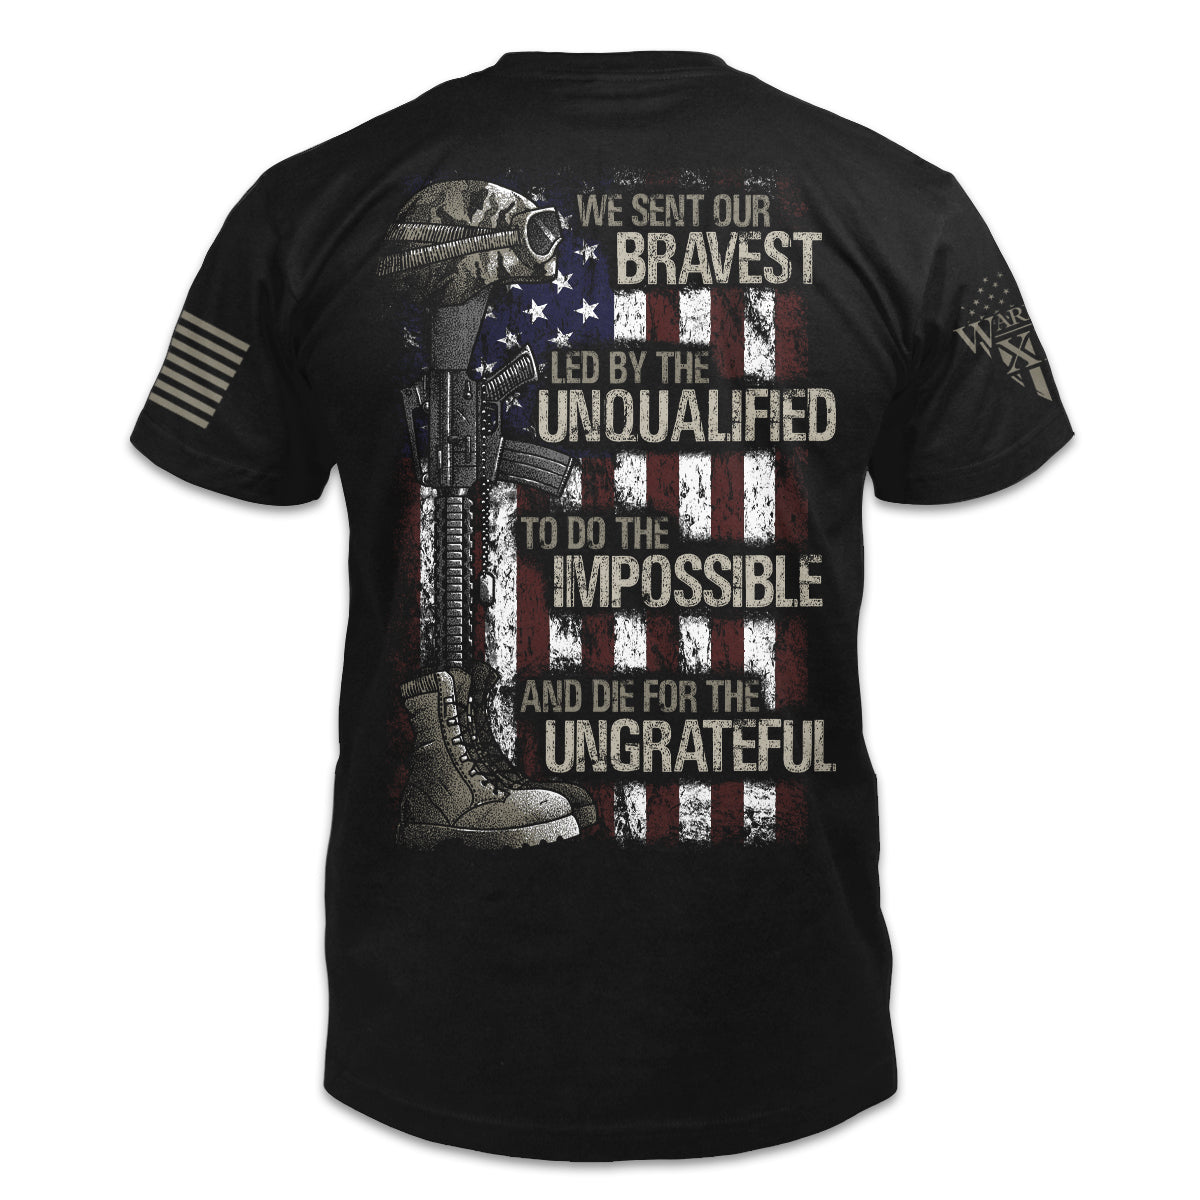 A black t-shirt with the words "We sent our bravest, Led by the unqualified, To do the impossible, And die for the ungrateful" with a USA flag, soldiers boot, helmet and gun printed on the back of shirt.